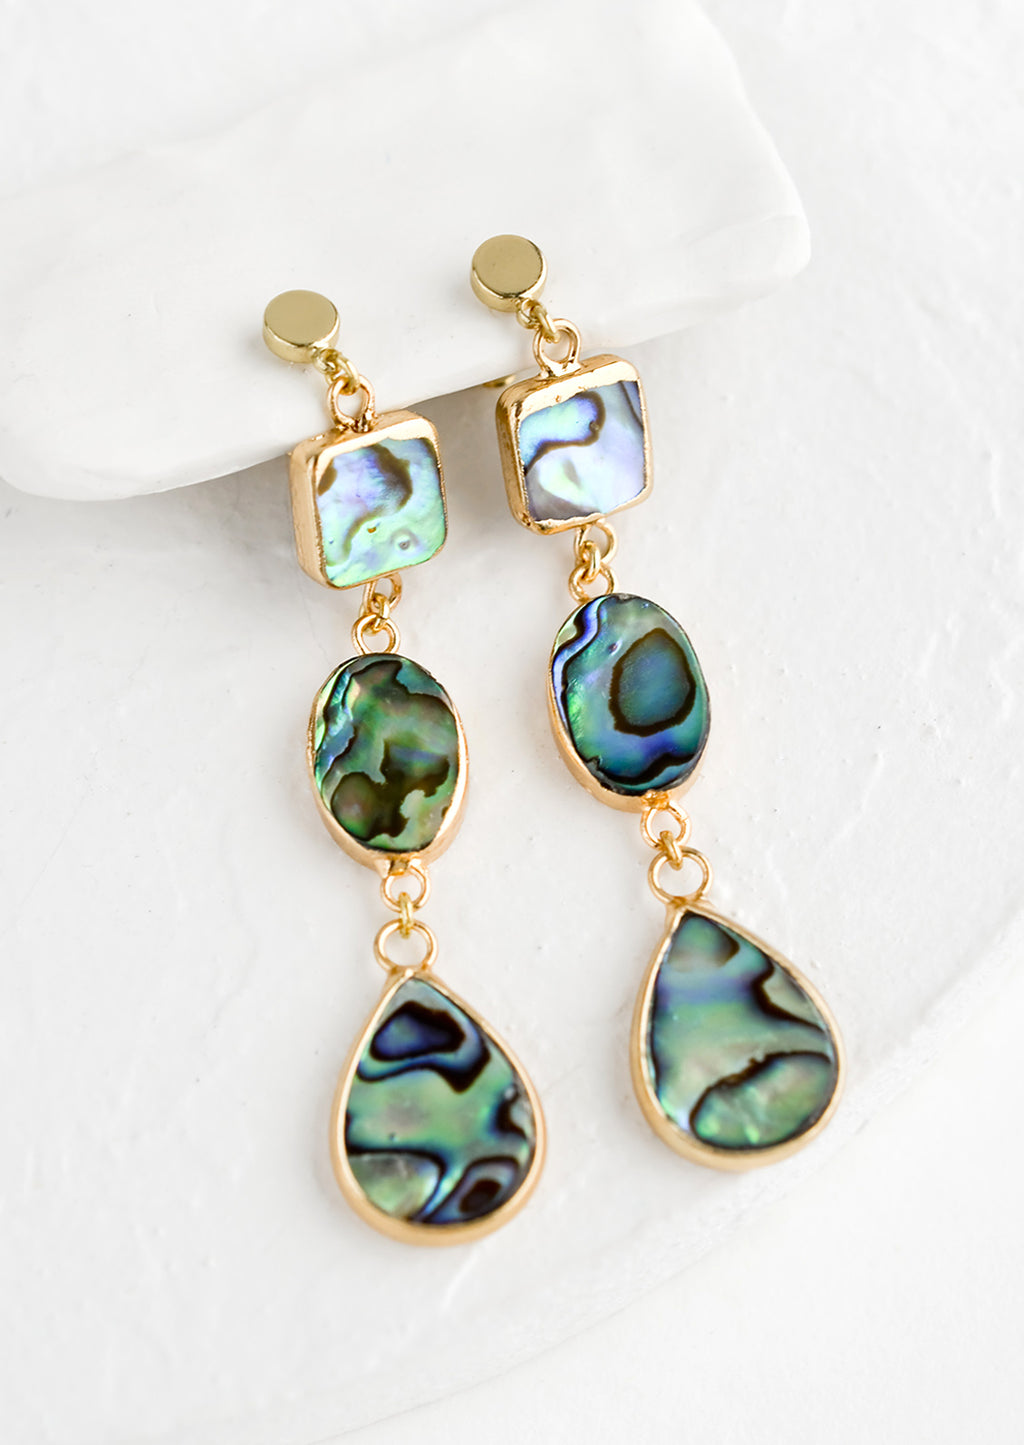 1: A pair of gold drop earrings with three geometric shapes in abalone shell.